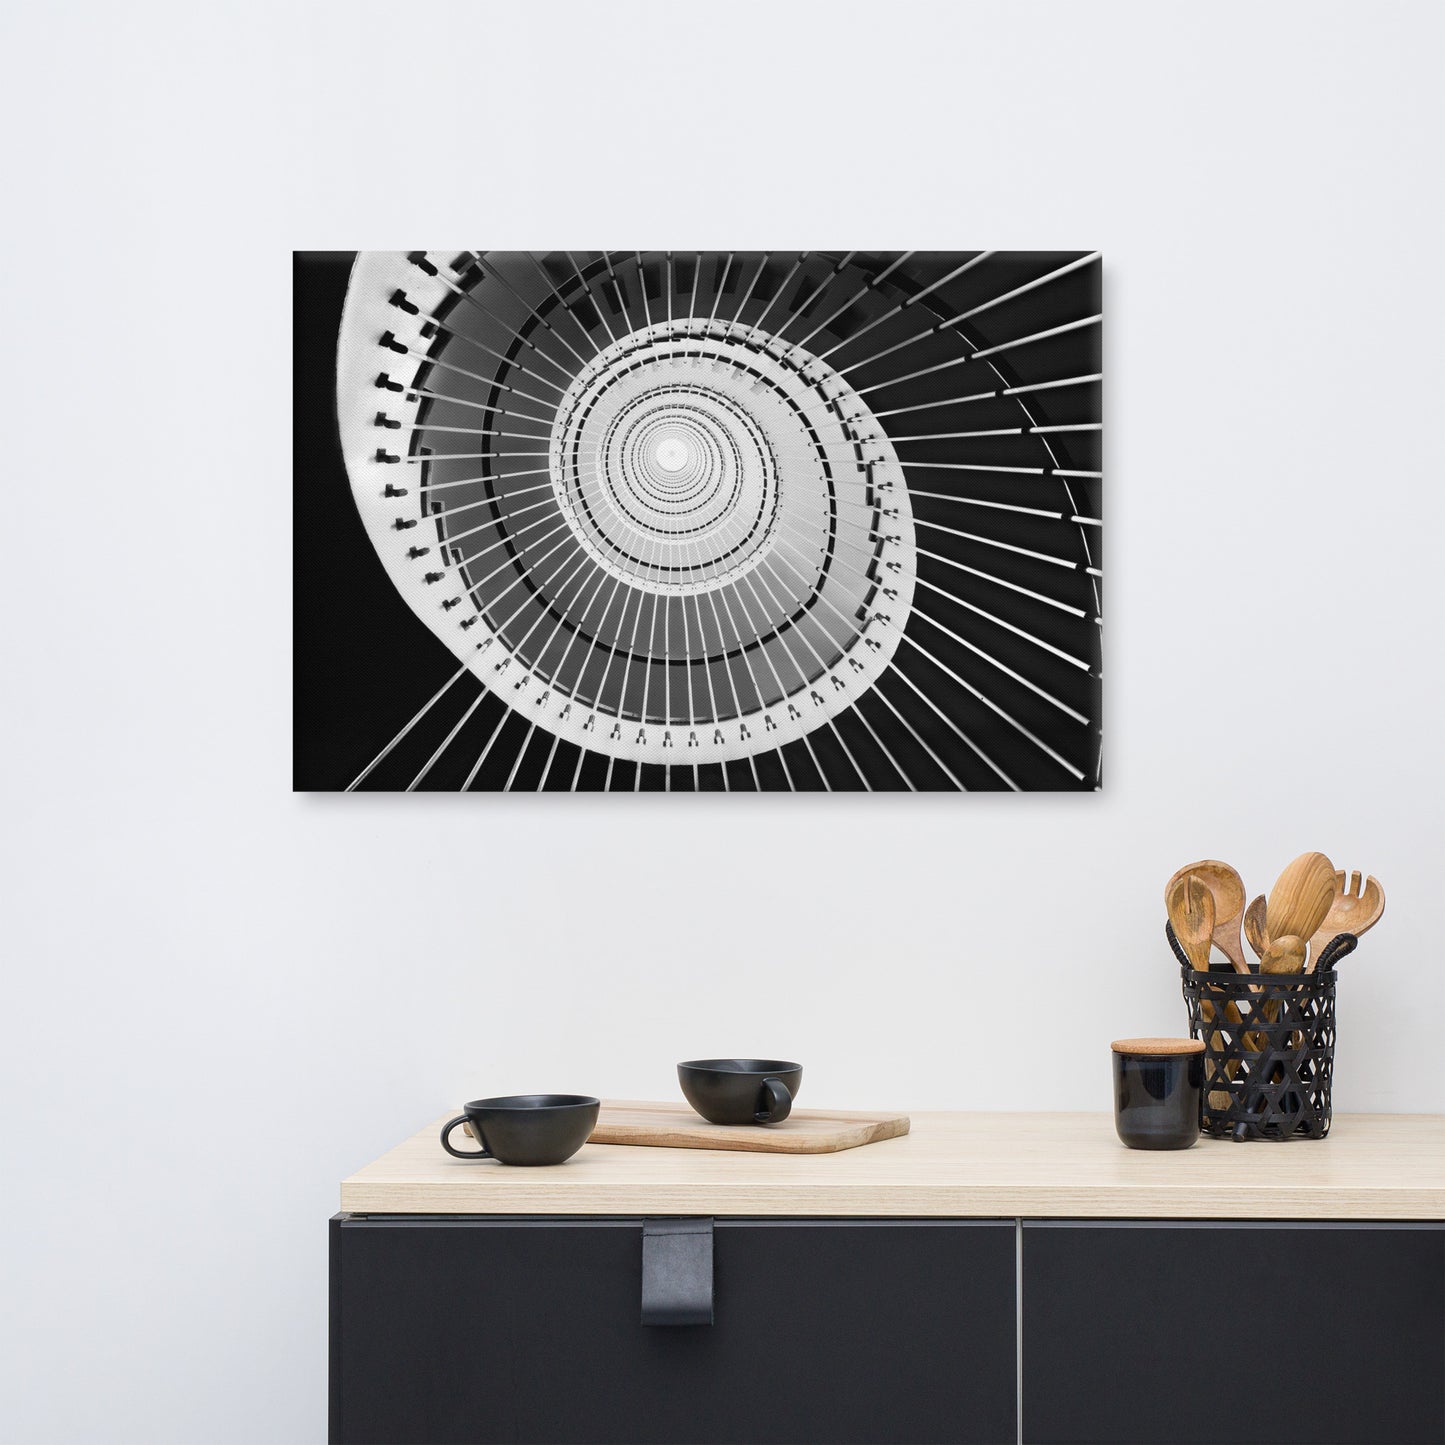 Never Ending Ascent - Equiangular Spiral Black And White Architectural Photograph Canvas Wall Art Print